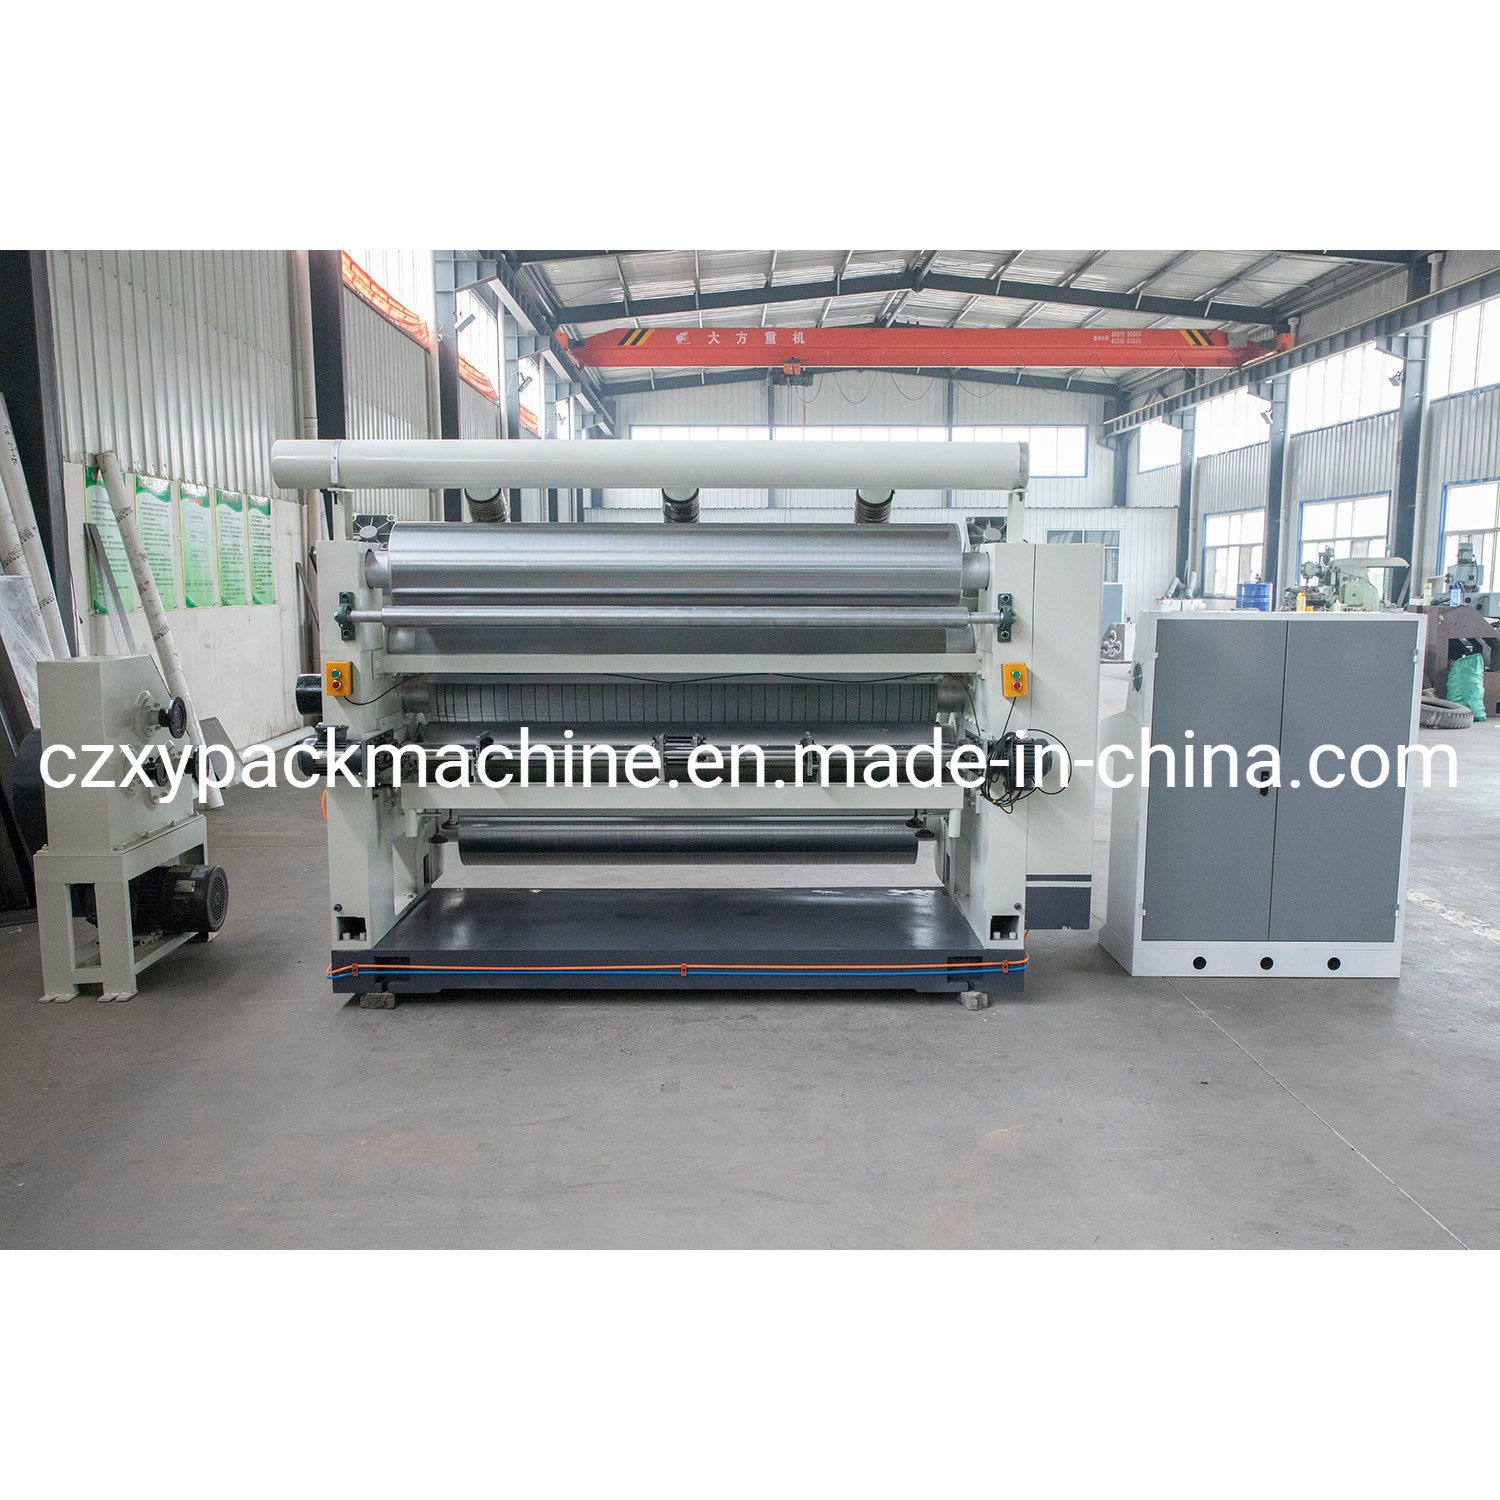 Carton Single Facer Machine for Wholesales with Low Price and Better Quality